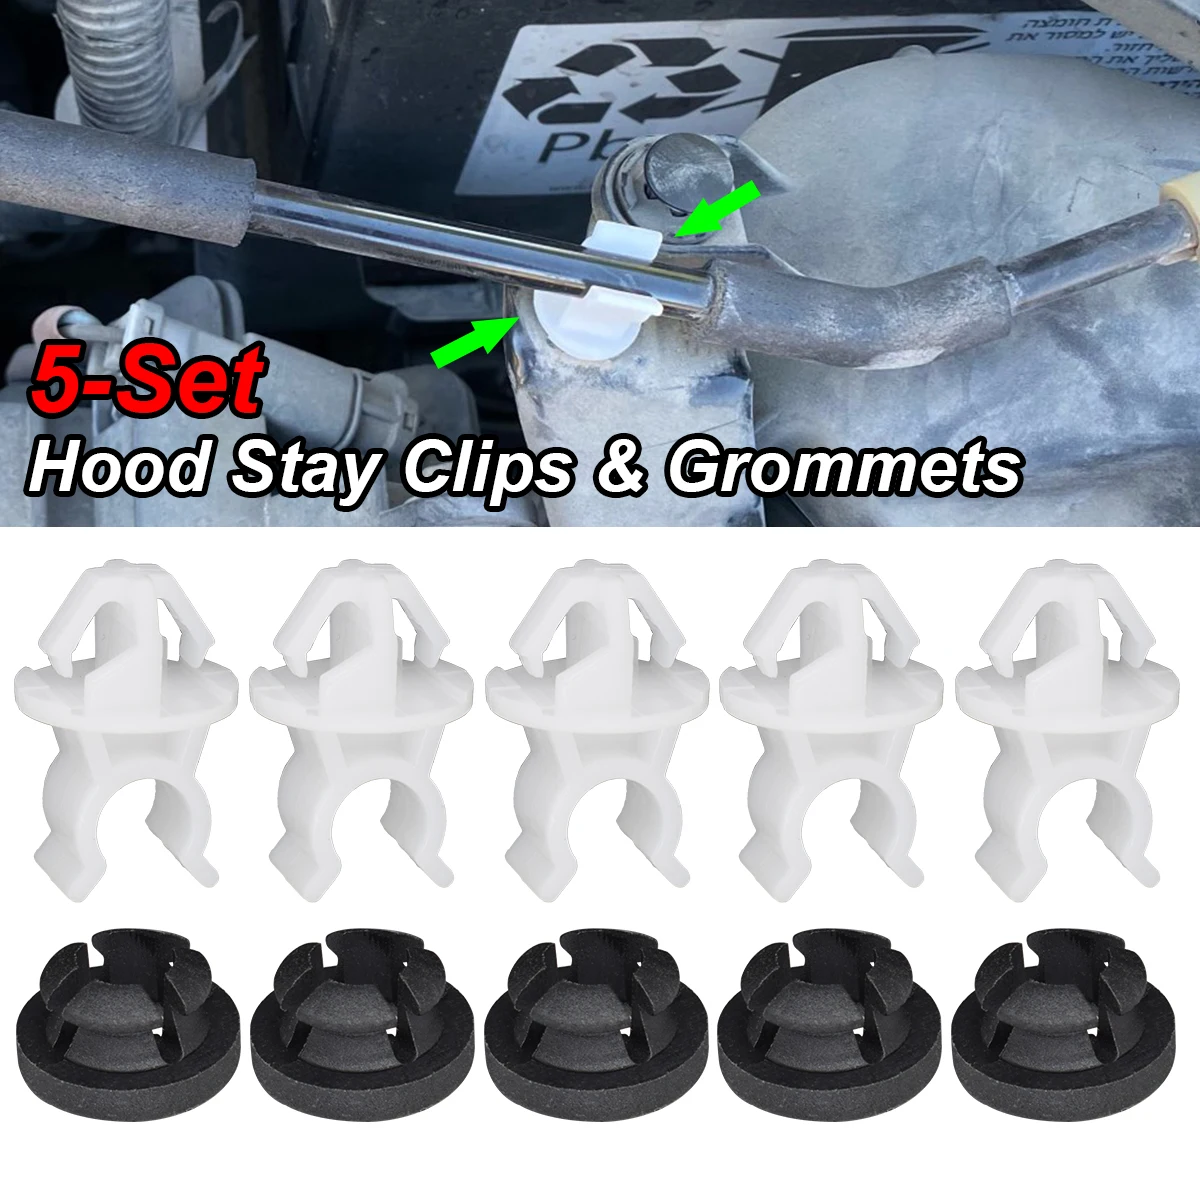 Net hood support prop rod holder clip for honda s2000 accord odyssey prelude city civic thumb200